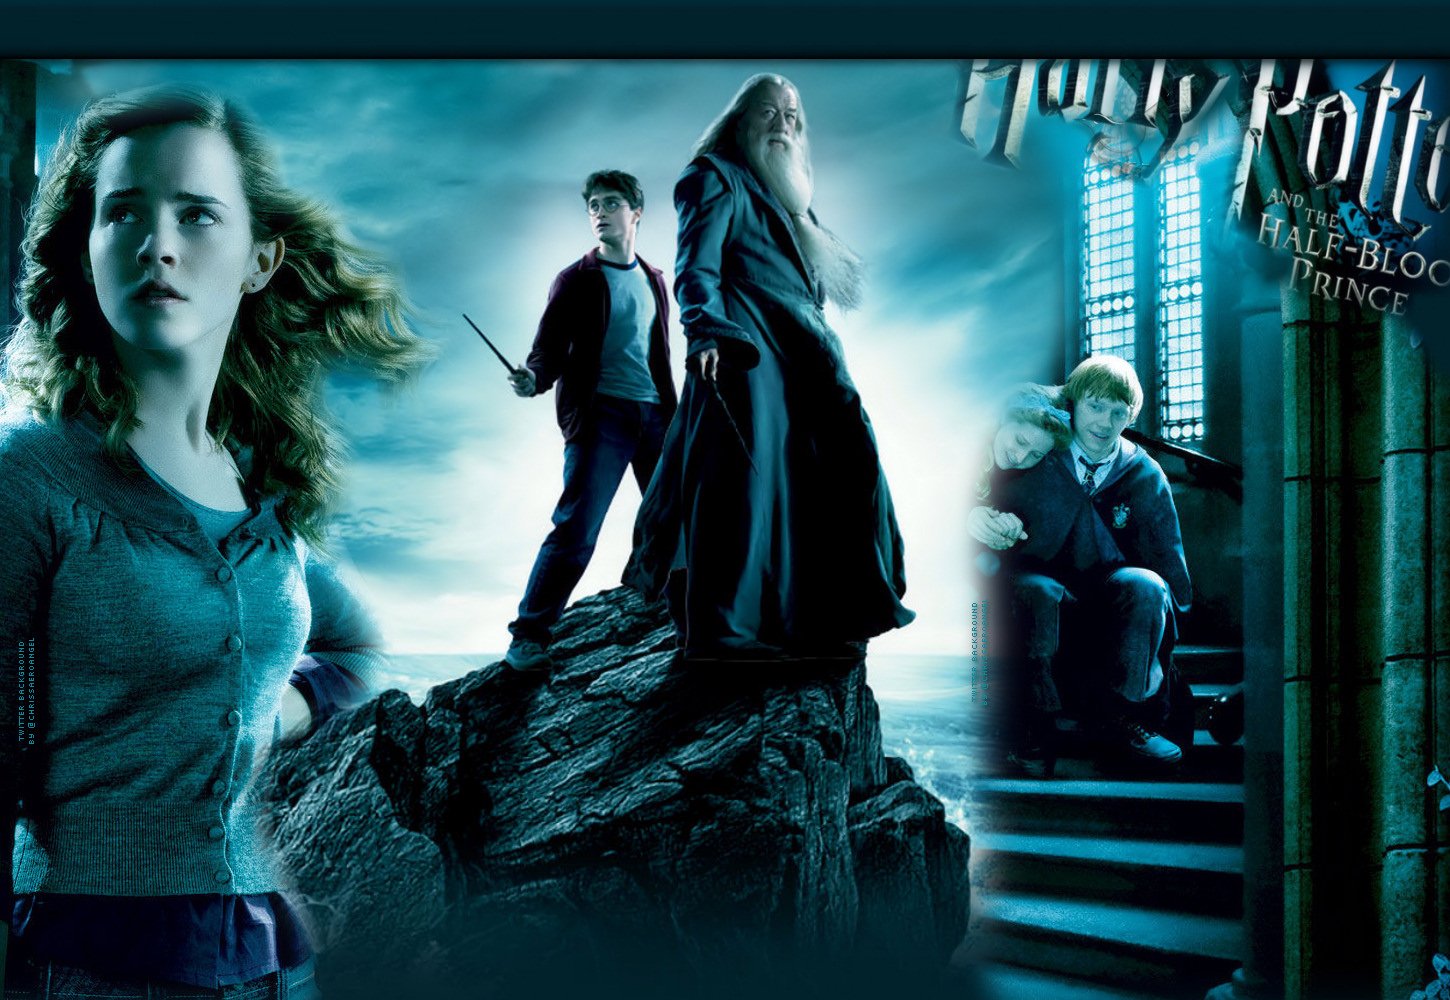 Harry Potter 6 Twitter Backgrounds Harry Potter 6 Twitter Themes 1450x1000